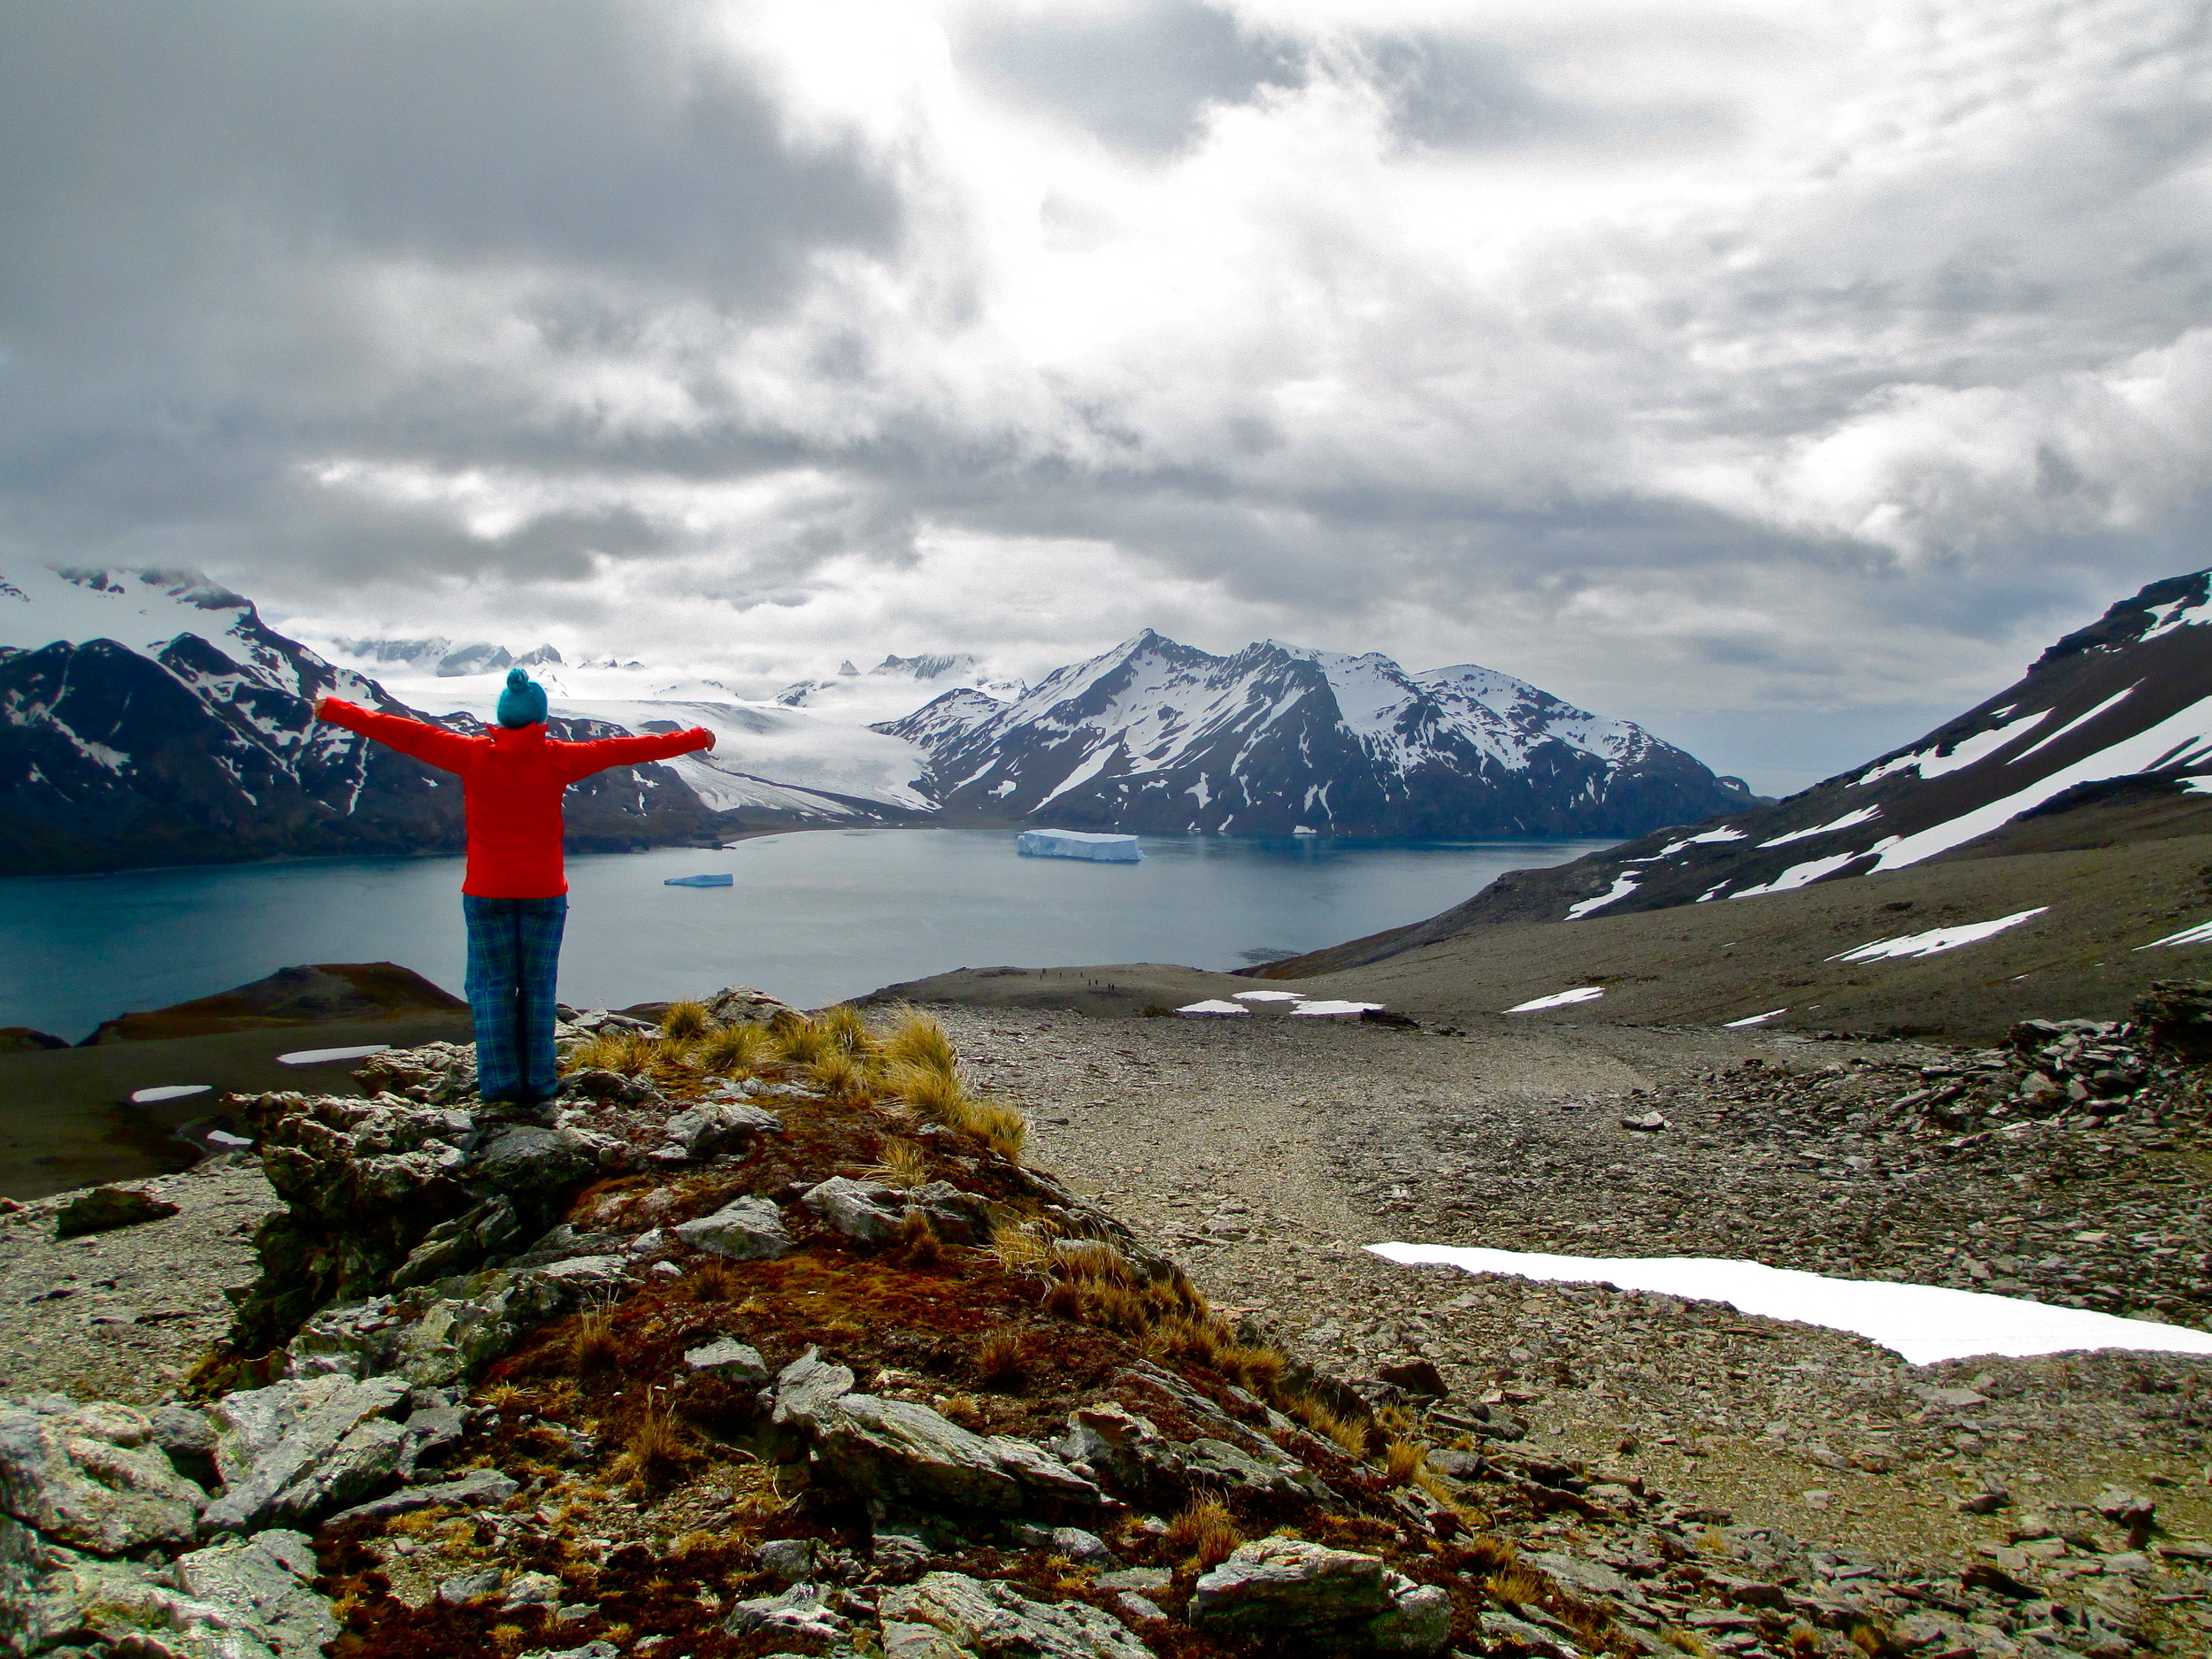 Breezy Grenier takes in the view during the “Shackleton Walk,” which retraces famous explorer Sir Ernest Shackleton​’s footsteps across South Georgia, an island in the southern Atlantic Ocean. She made the trip in 2013.